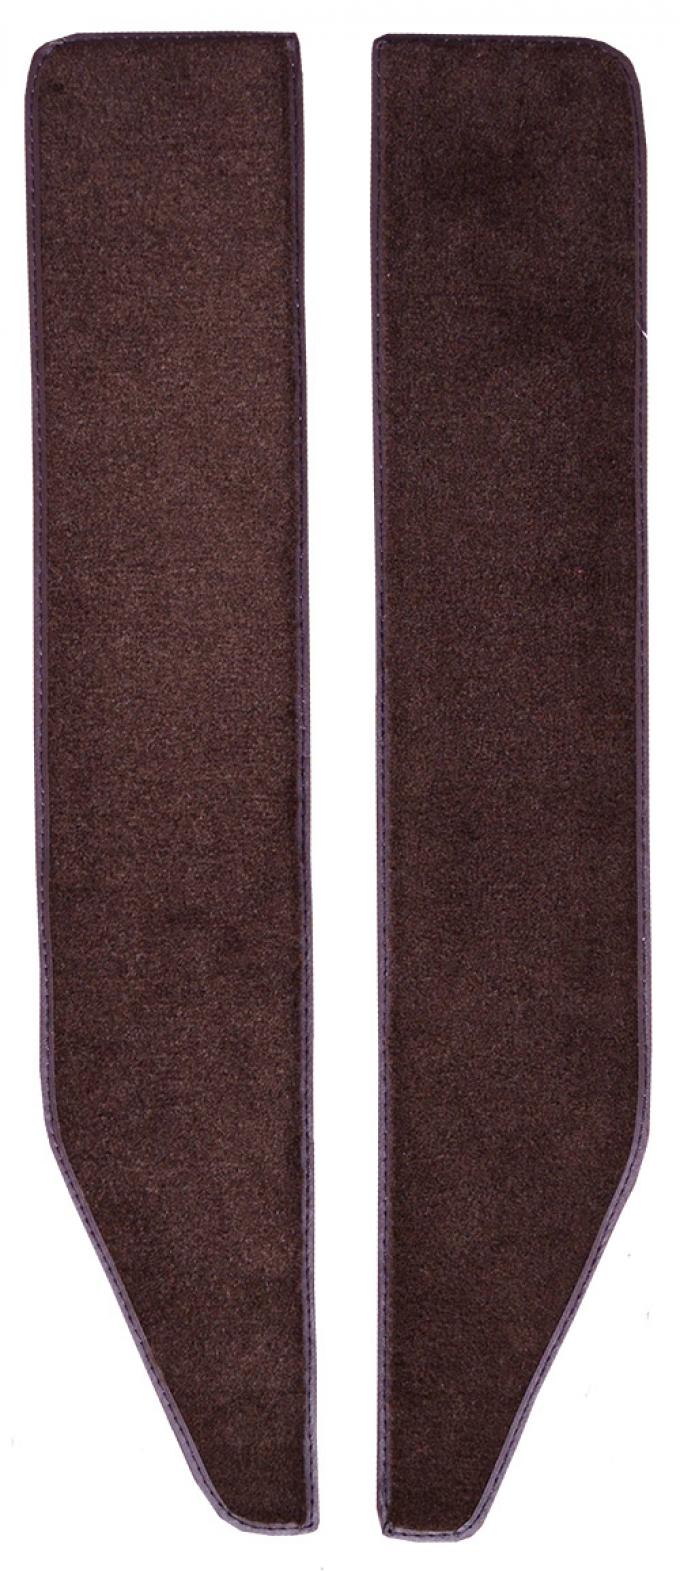 ACC 1975-1979 Ford F-100 Door Panel Inserts with Cardboard 2pc Cutpile Carpet